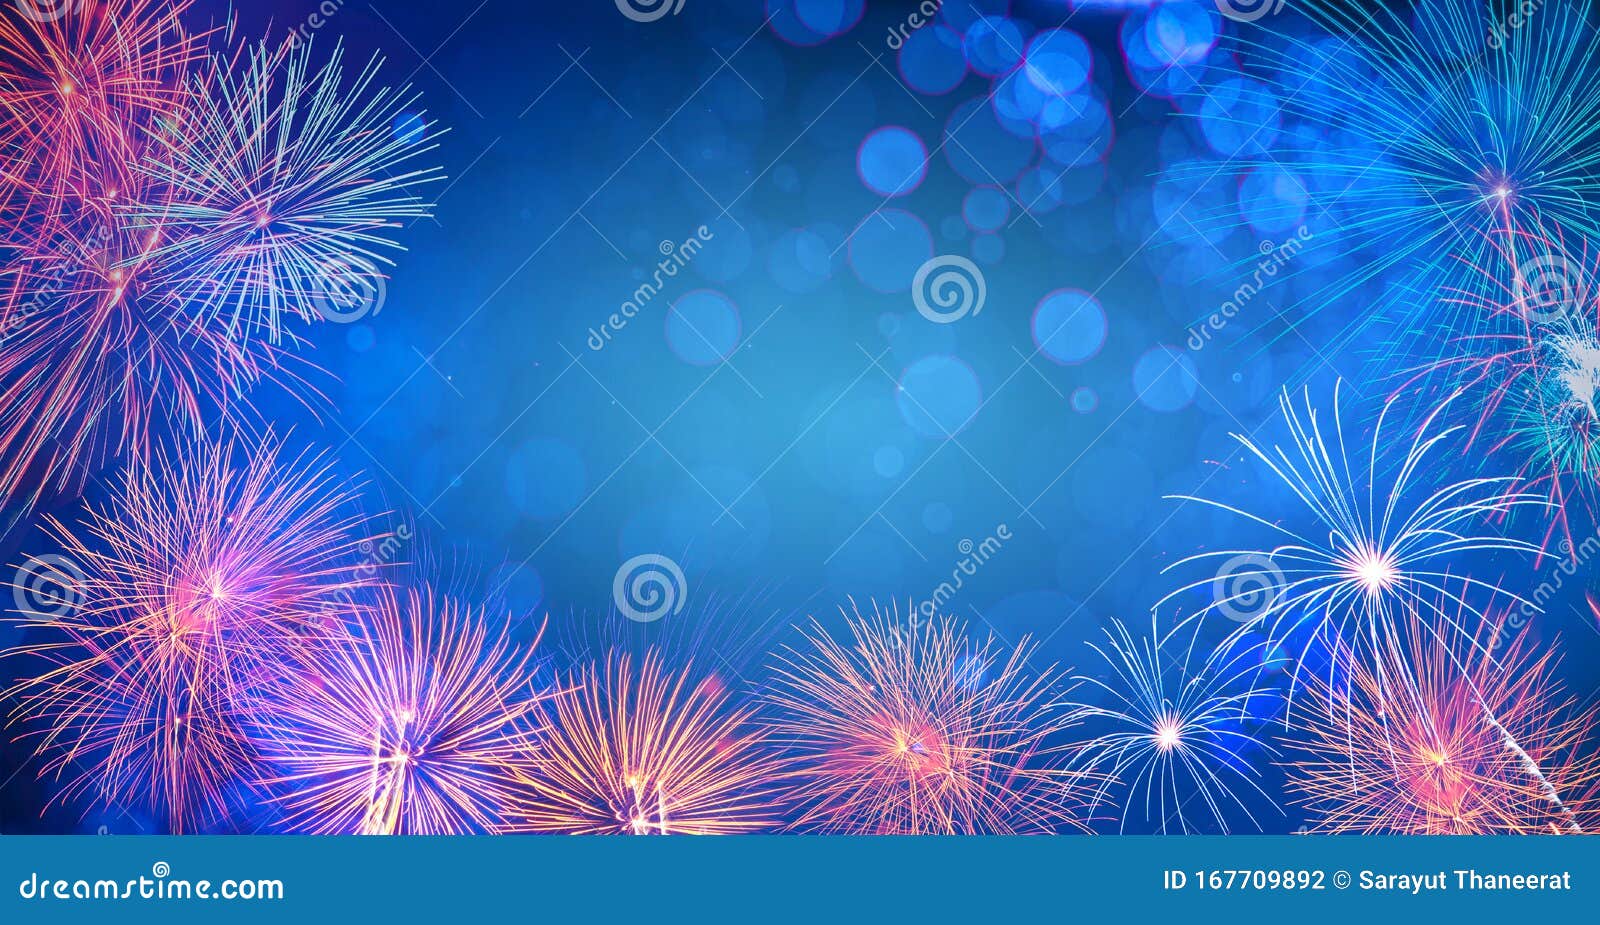 abstract  background with fireworks.background of new years day celebration many colorful